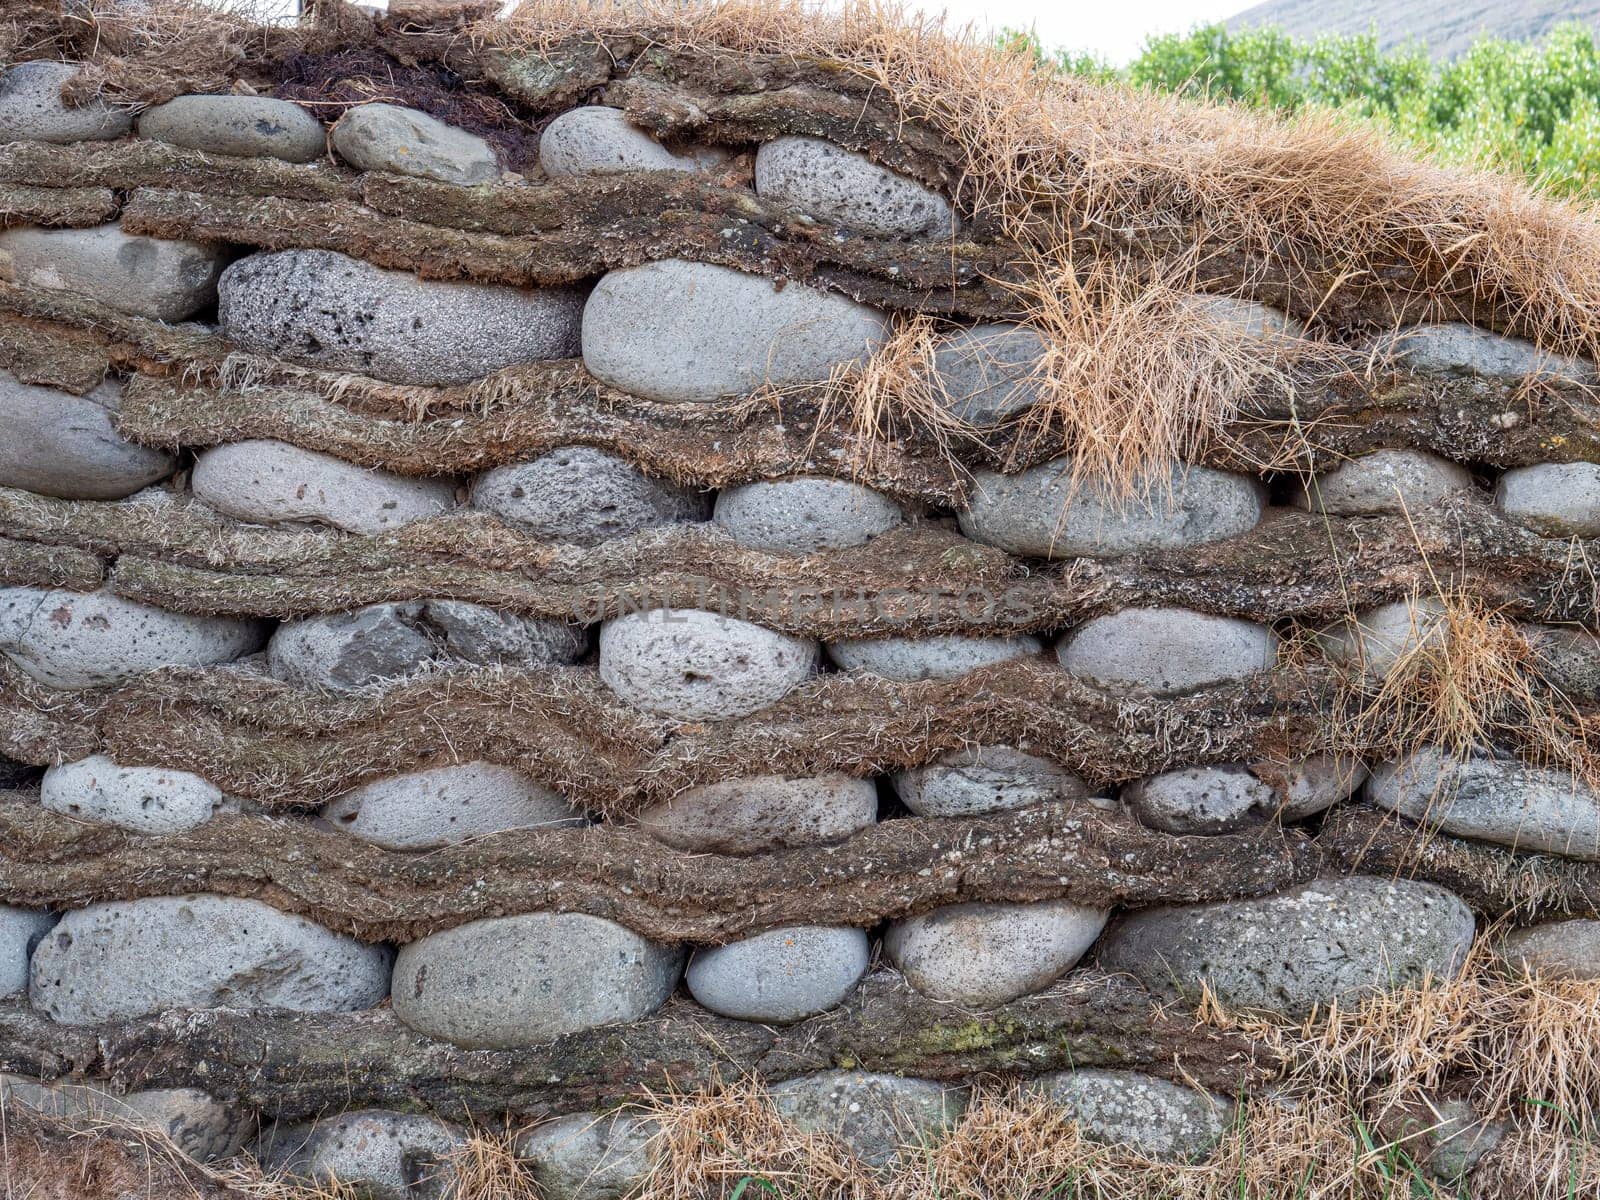 Image of Traditional Icelandic turf wall built over stones and made of clamped blocks with strips between the layers.